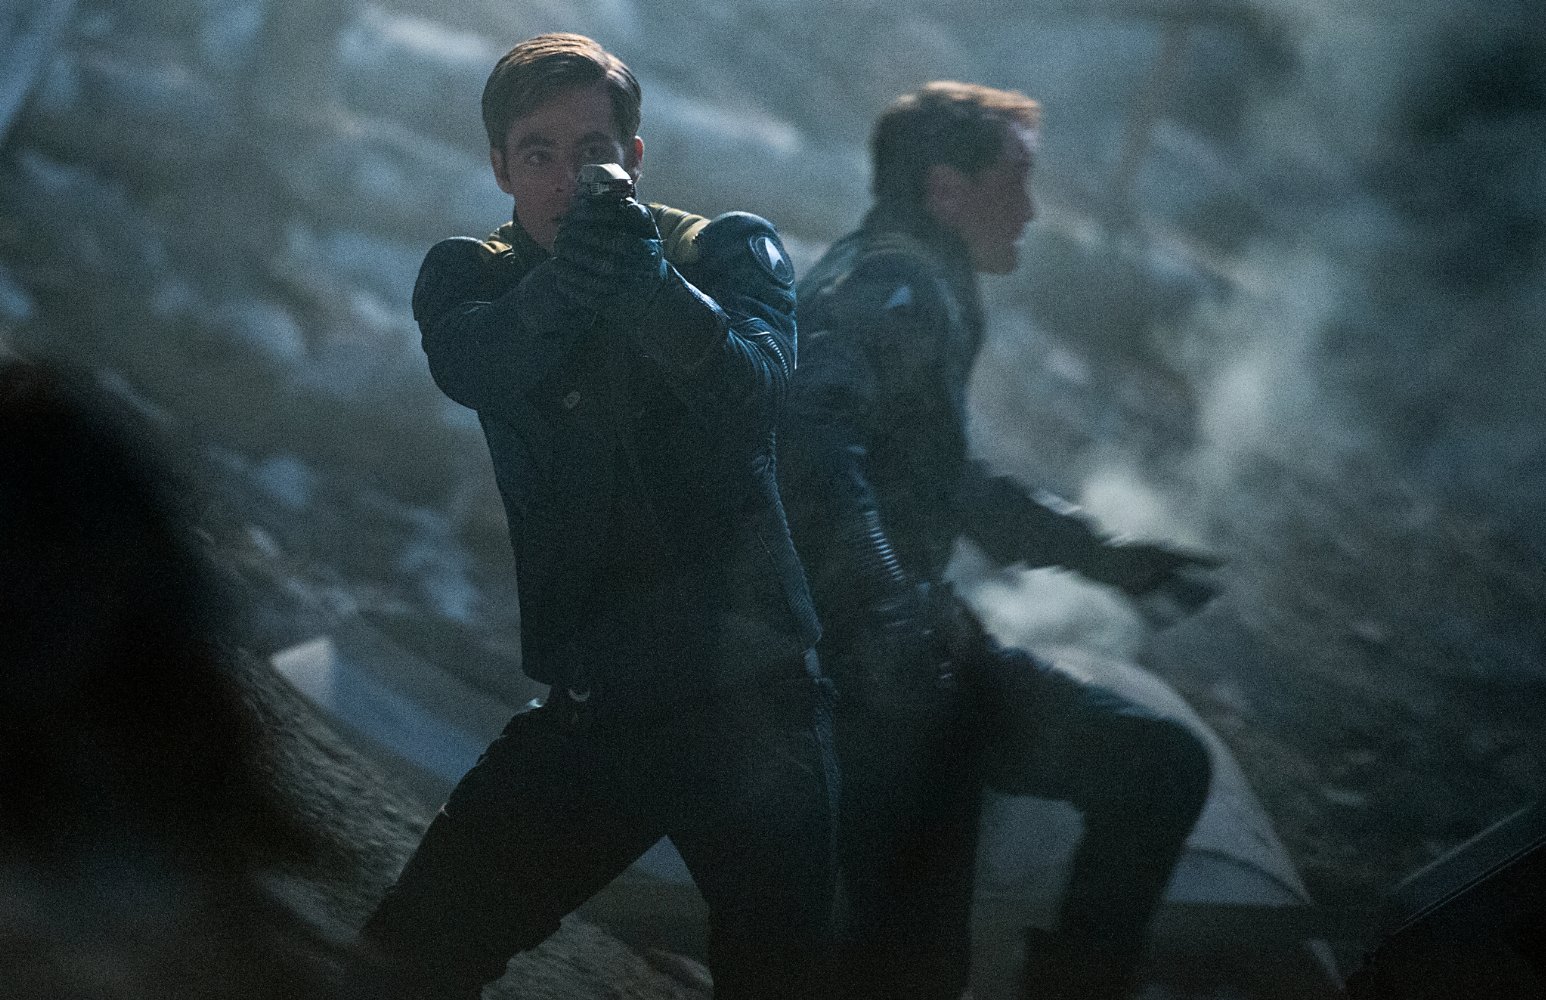 28 New Hi-Res Images from STAR TREK BEYOND | The Entertainment Factor1546 x 1000